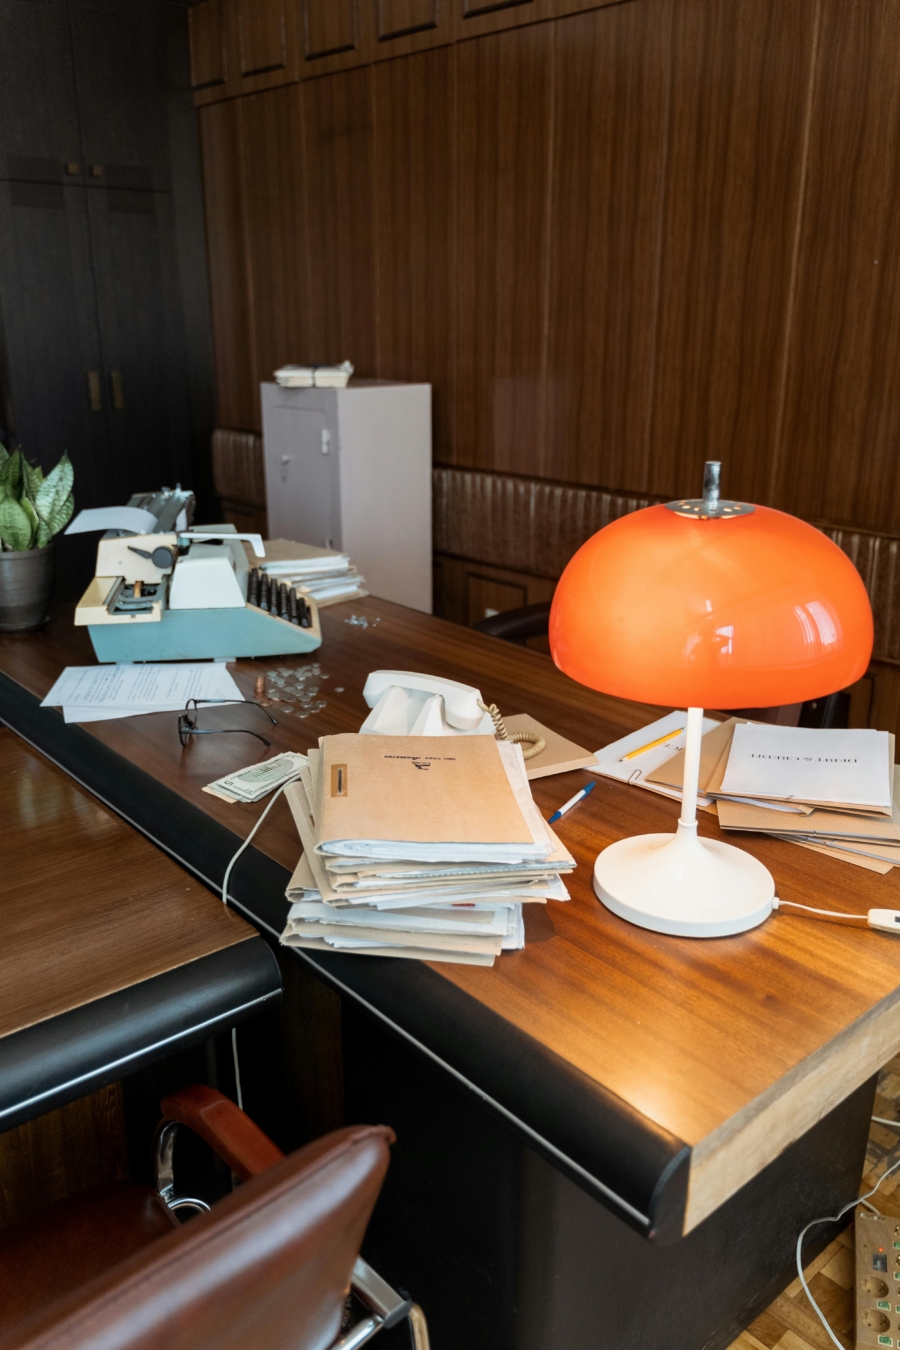 Disorganized desk, with a stack of files